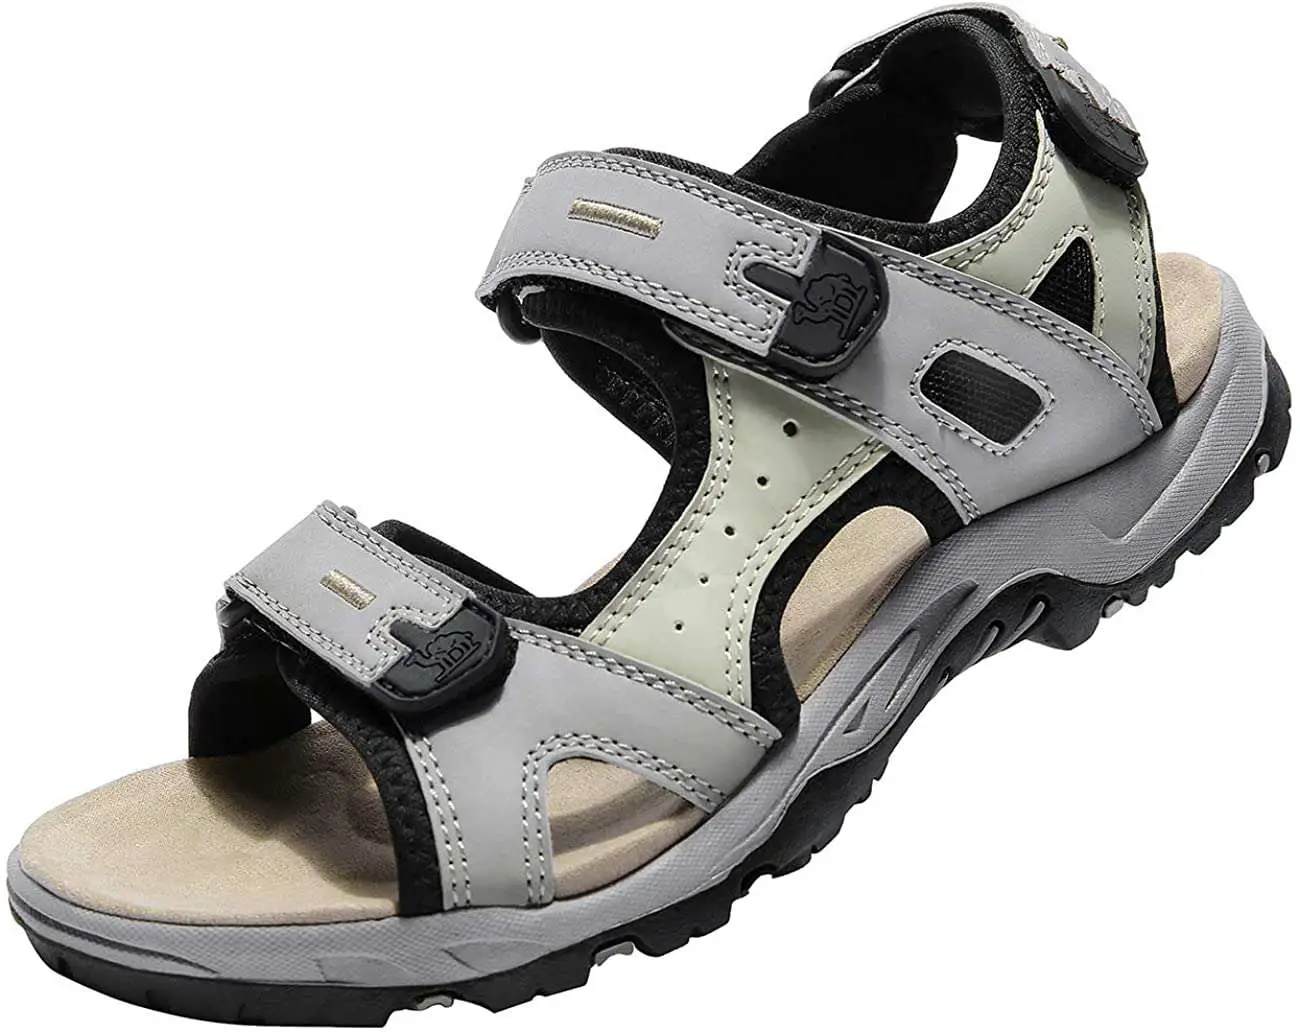 CAMEL CROWN Comfortable Hiking Sandals for Women Waterproof, Grey, Size ...